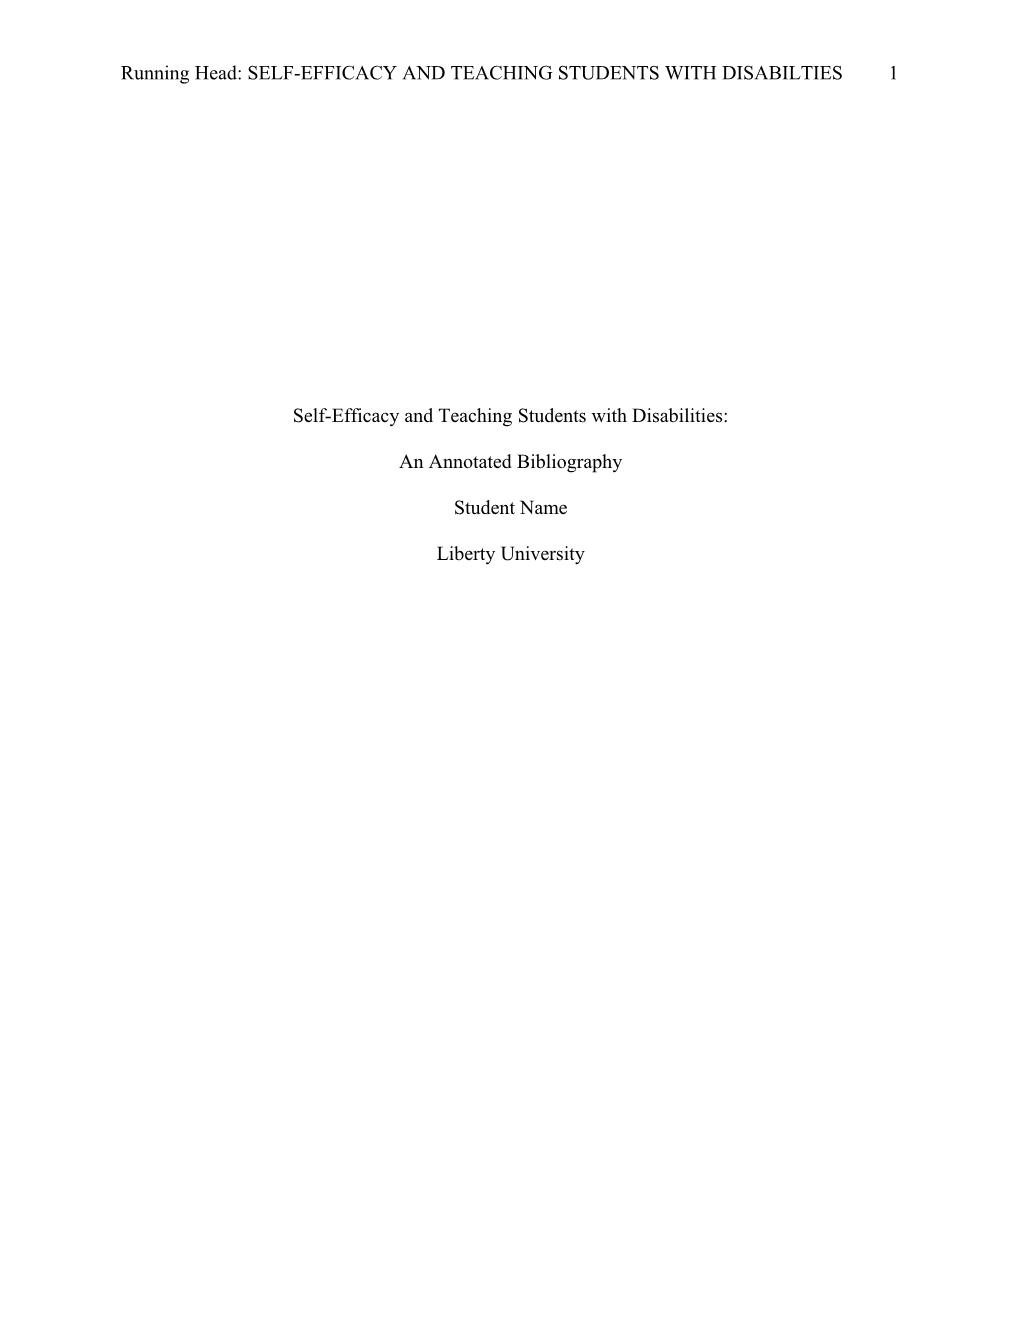 Self-Efficacy and Teaching Students with Disabilities 1